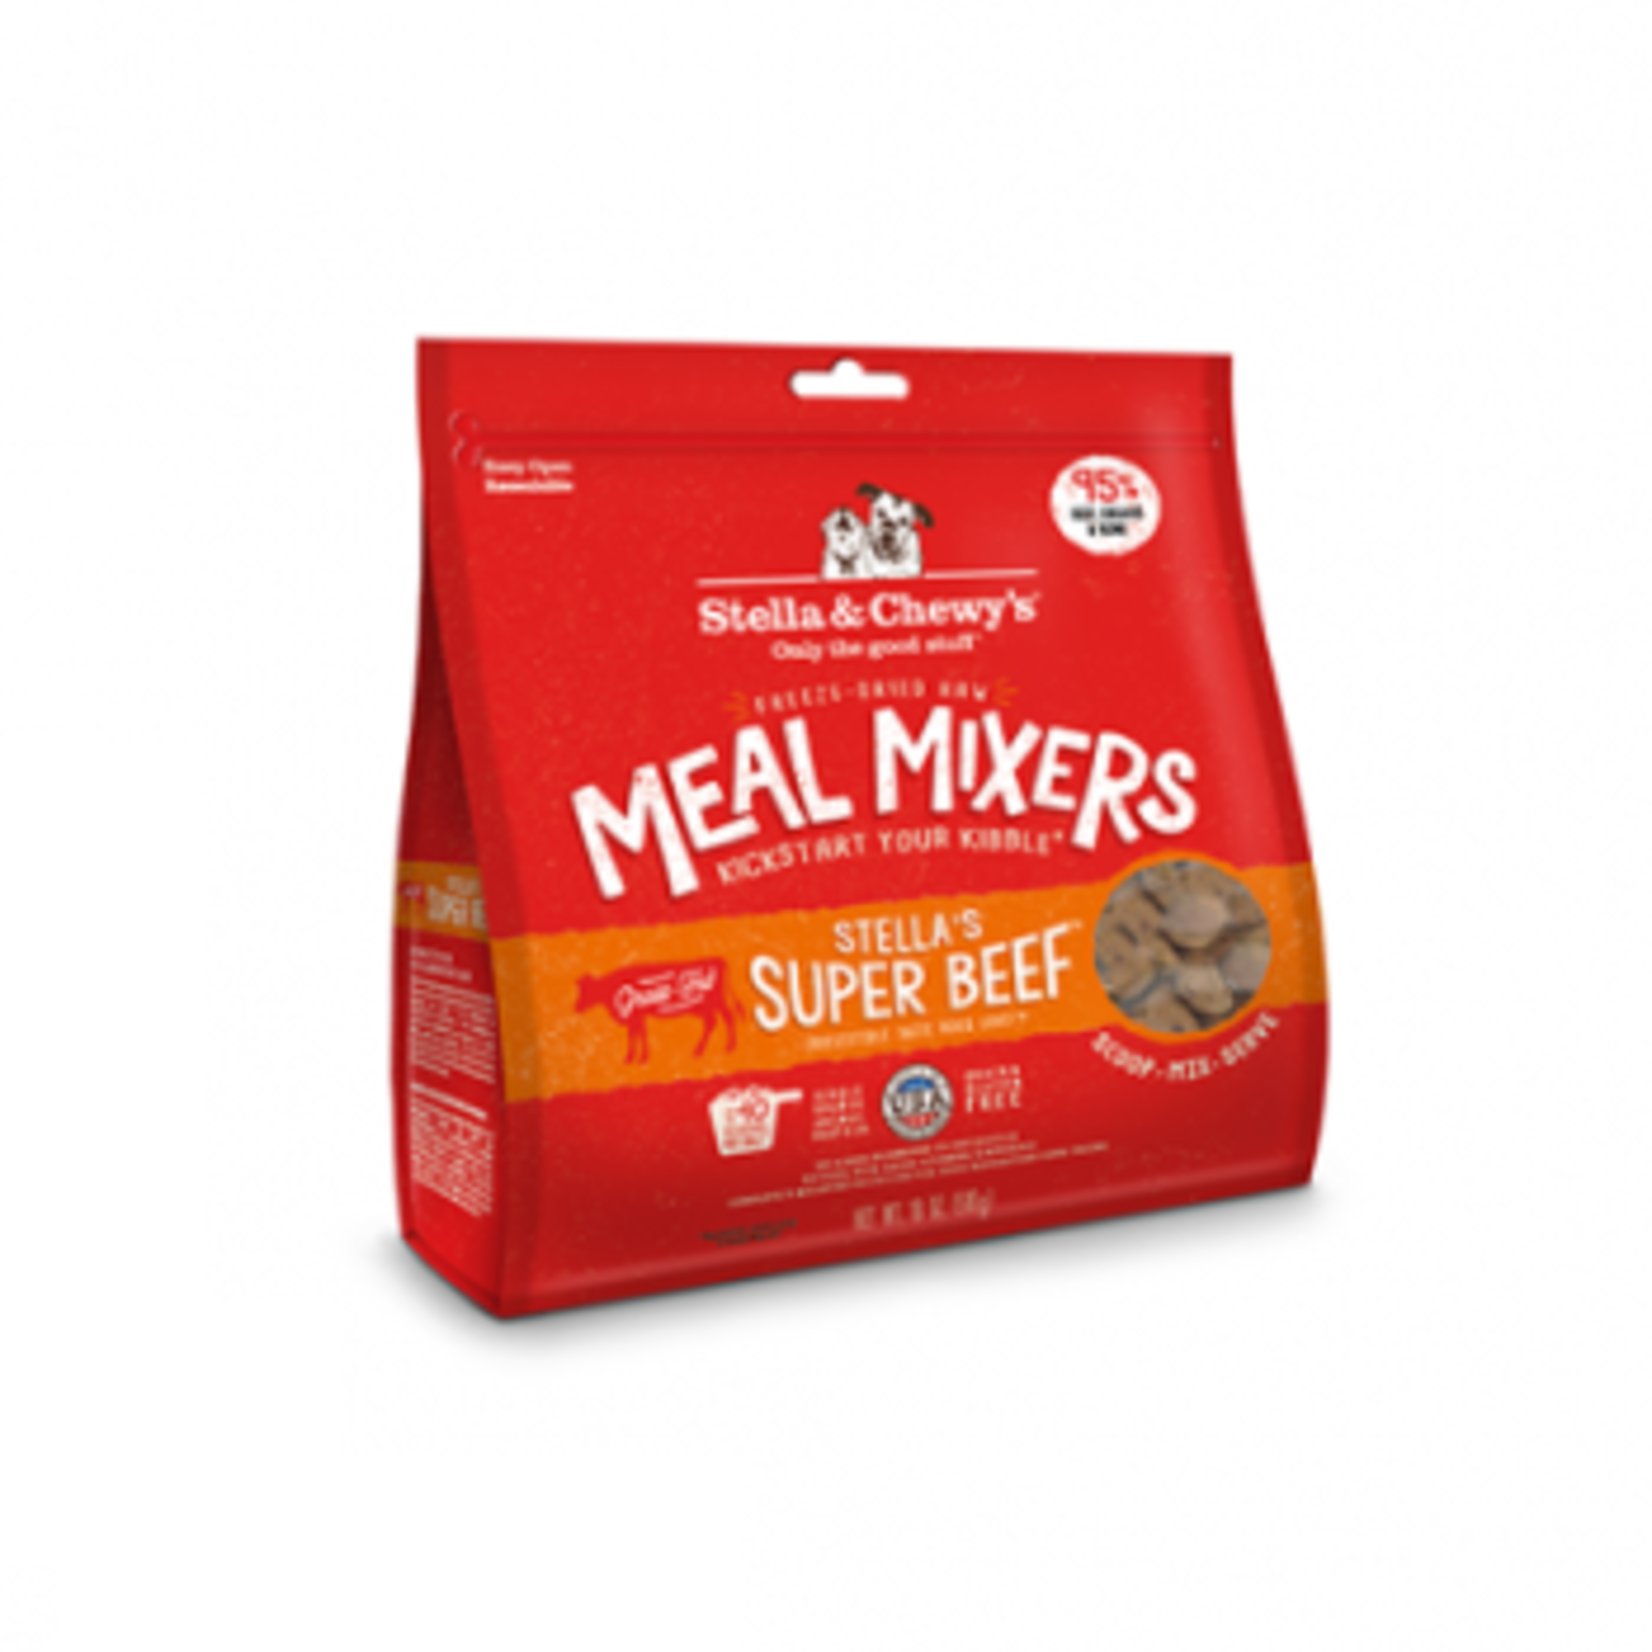 Stella & Chewy s Super Beef - Meal Mixer - Freeze Dried- 18 oz